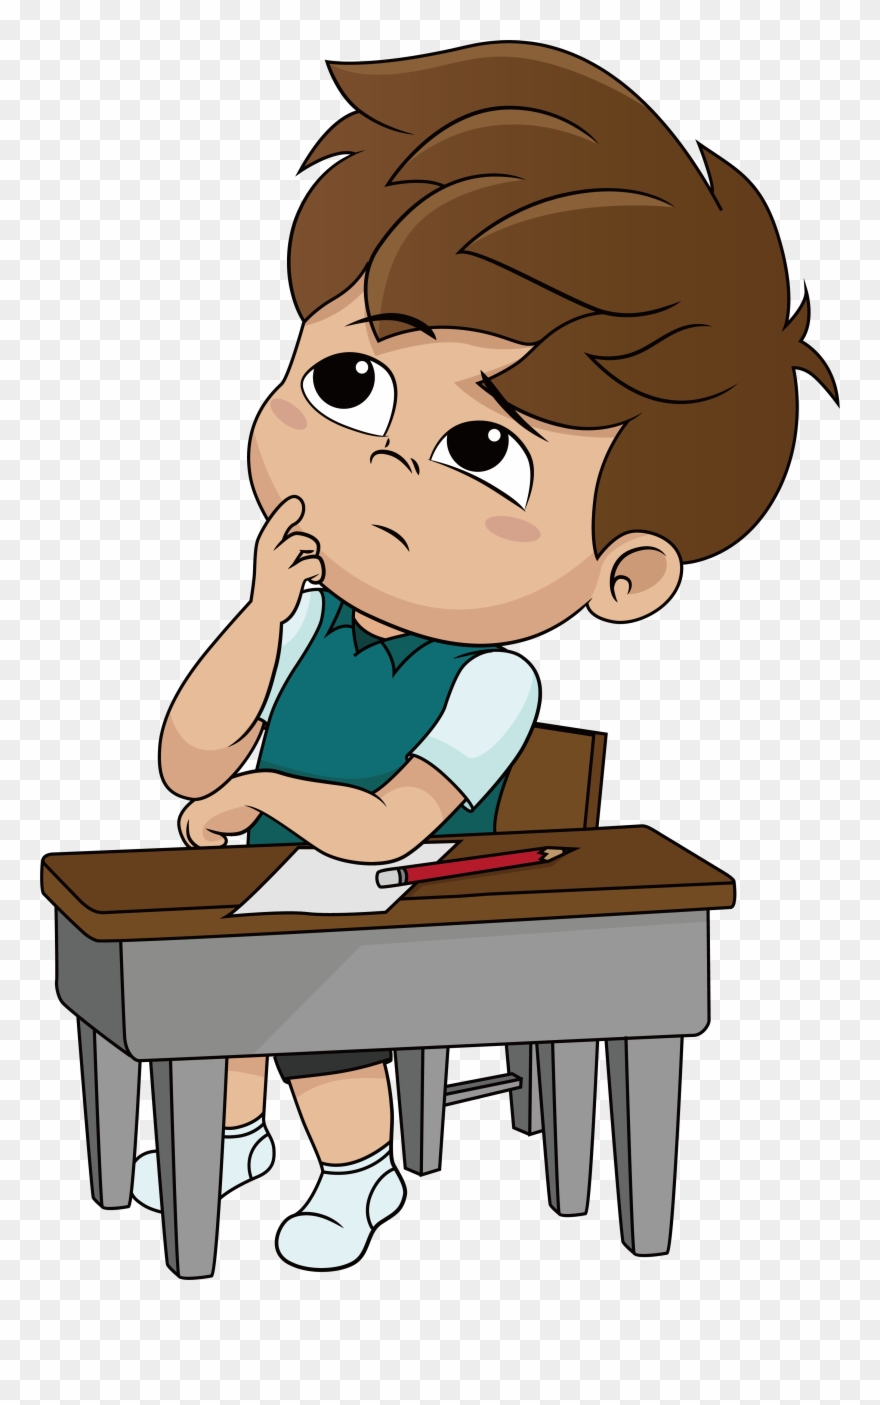 Royalty Free Illustration A Thinking Little Boy Clipart